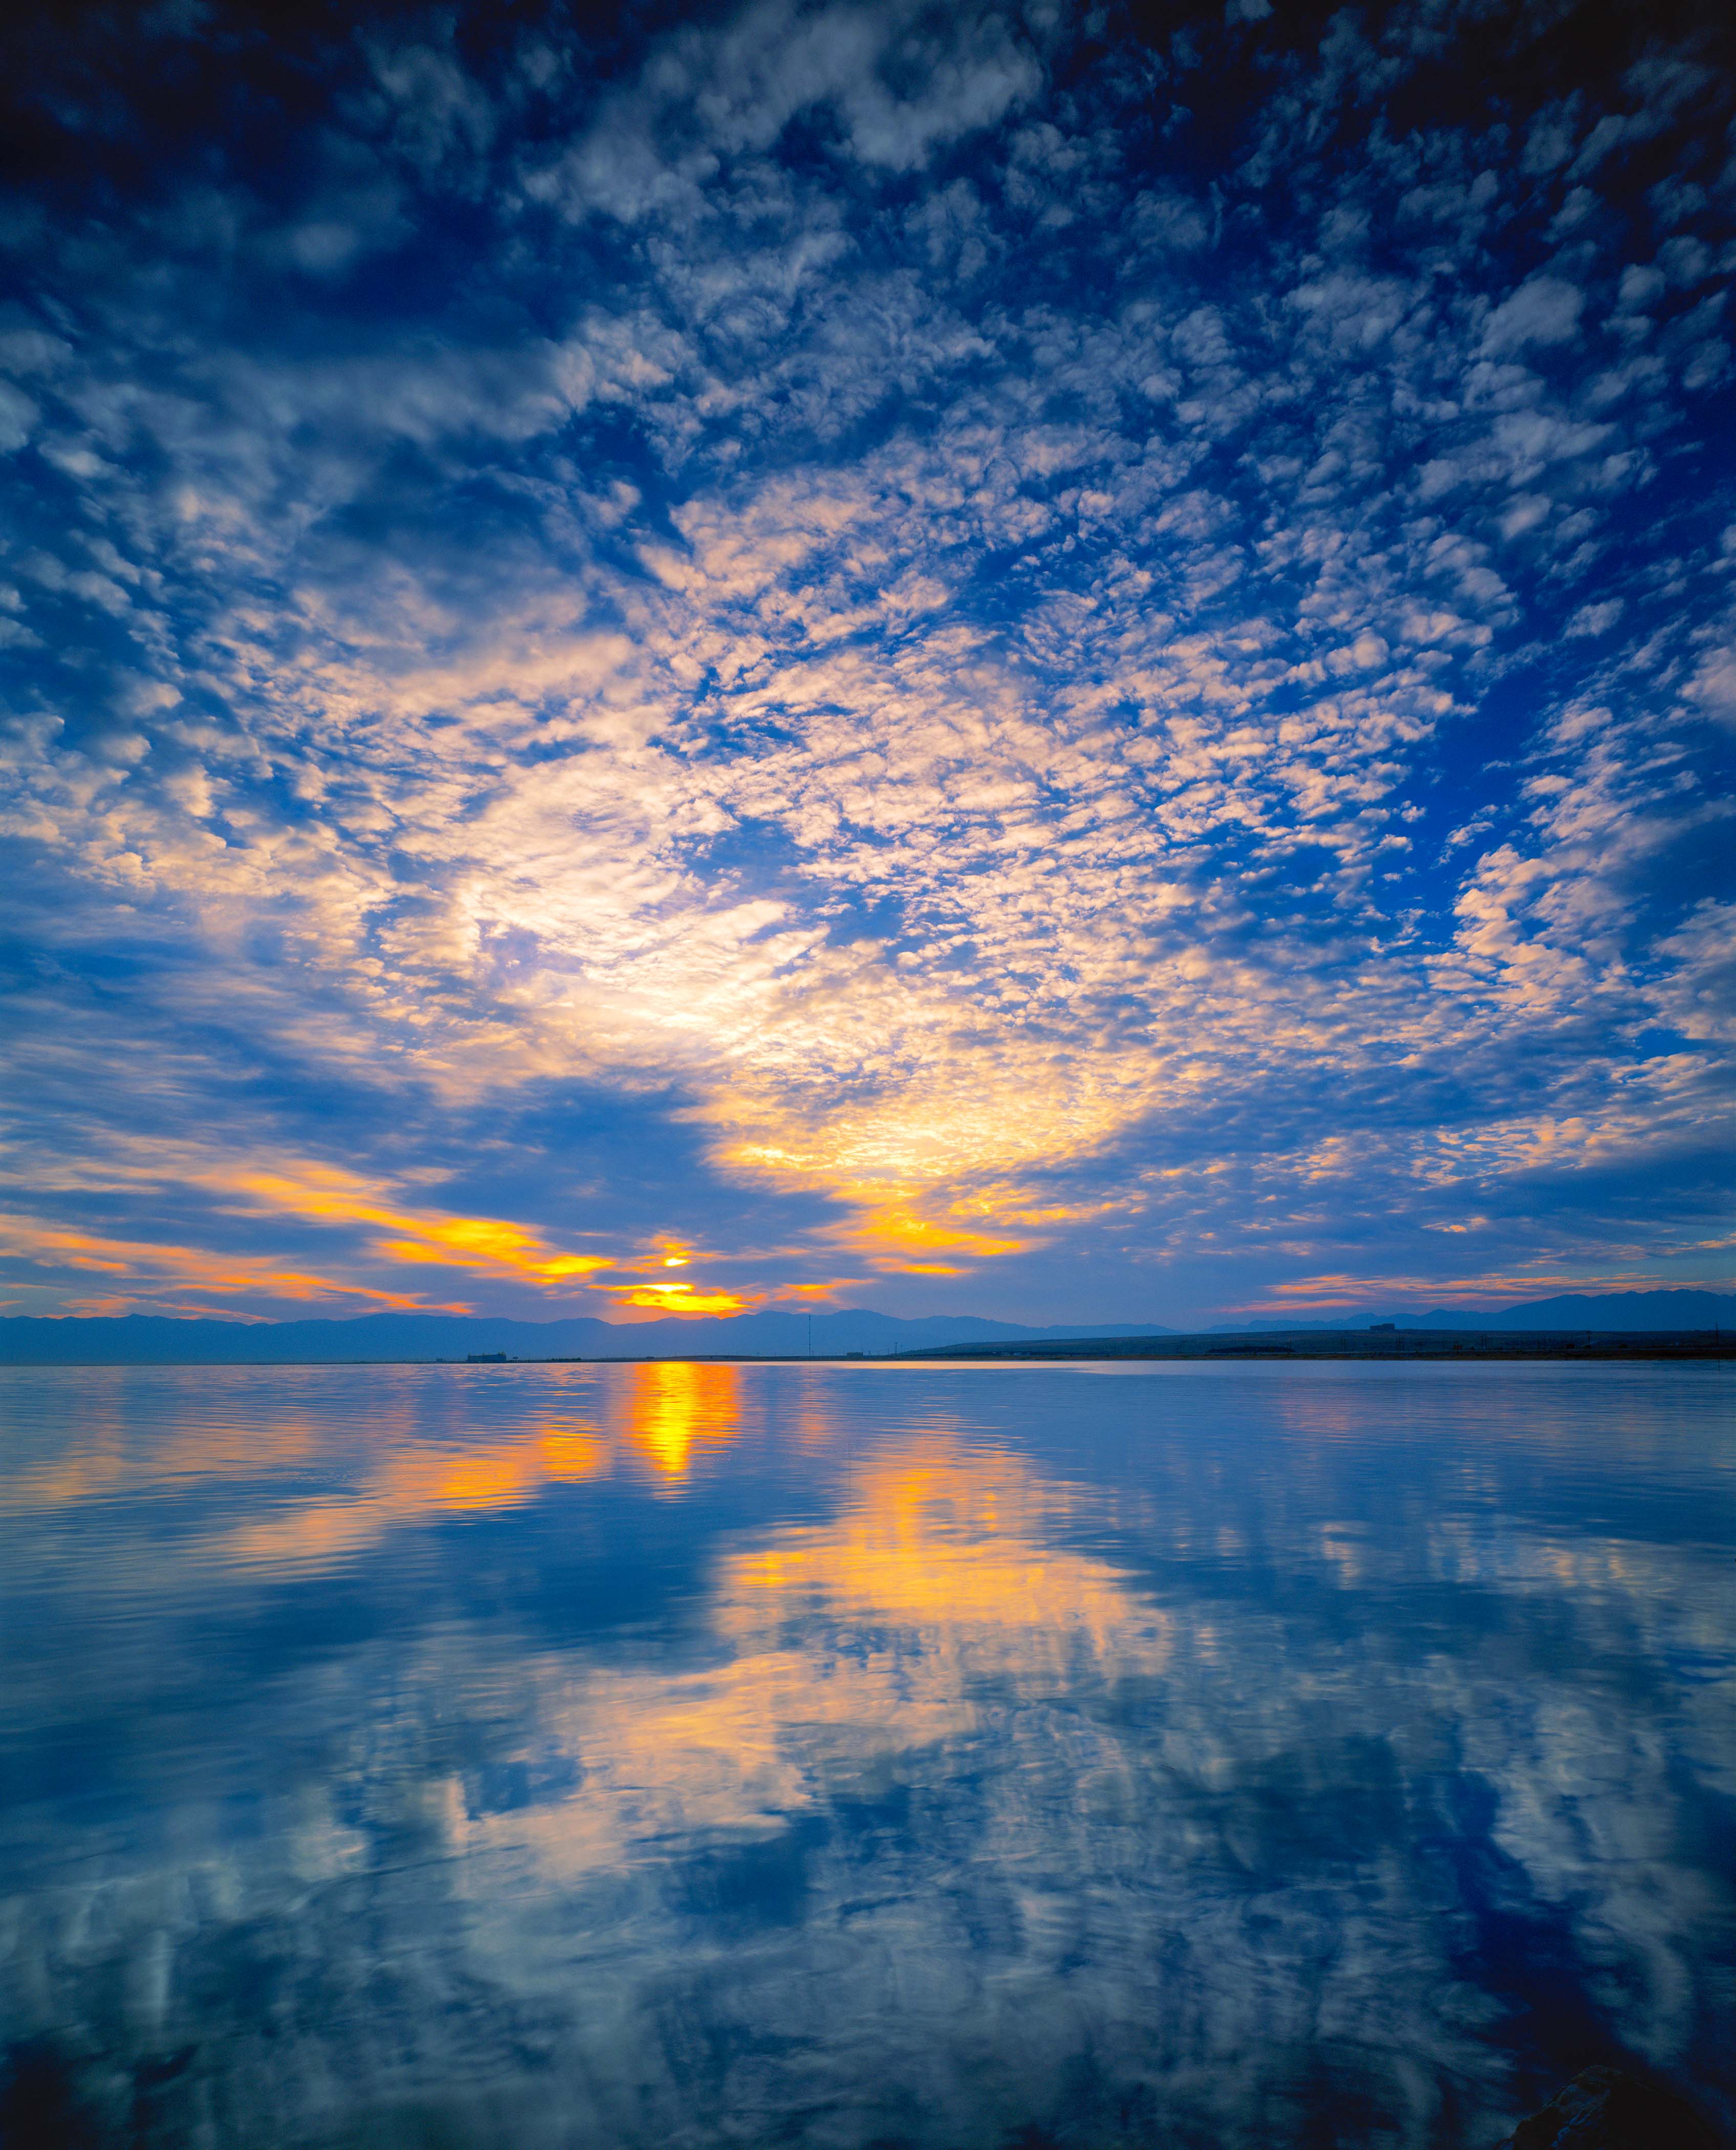 Sunrise Reflection in Great Salt Lake Photographed by Tom Till